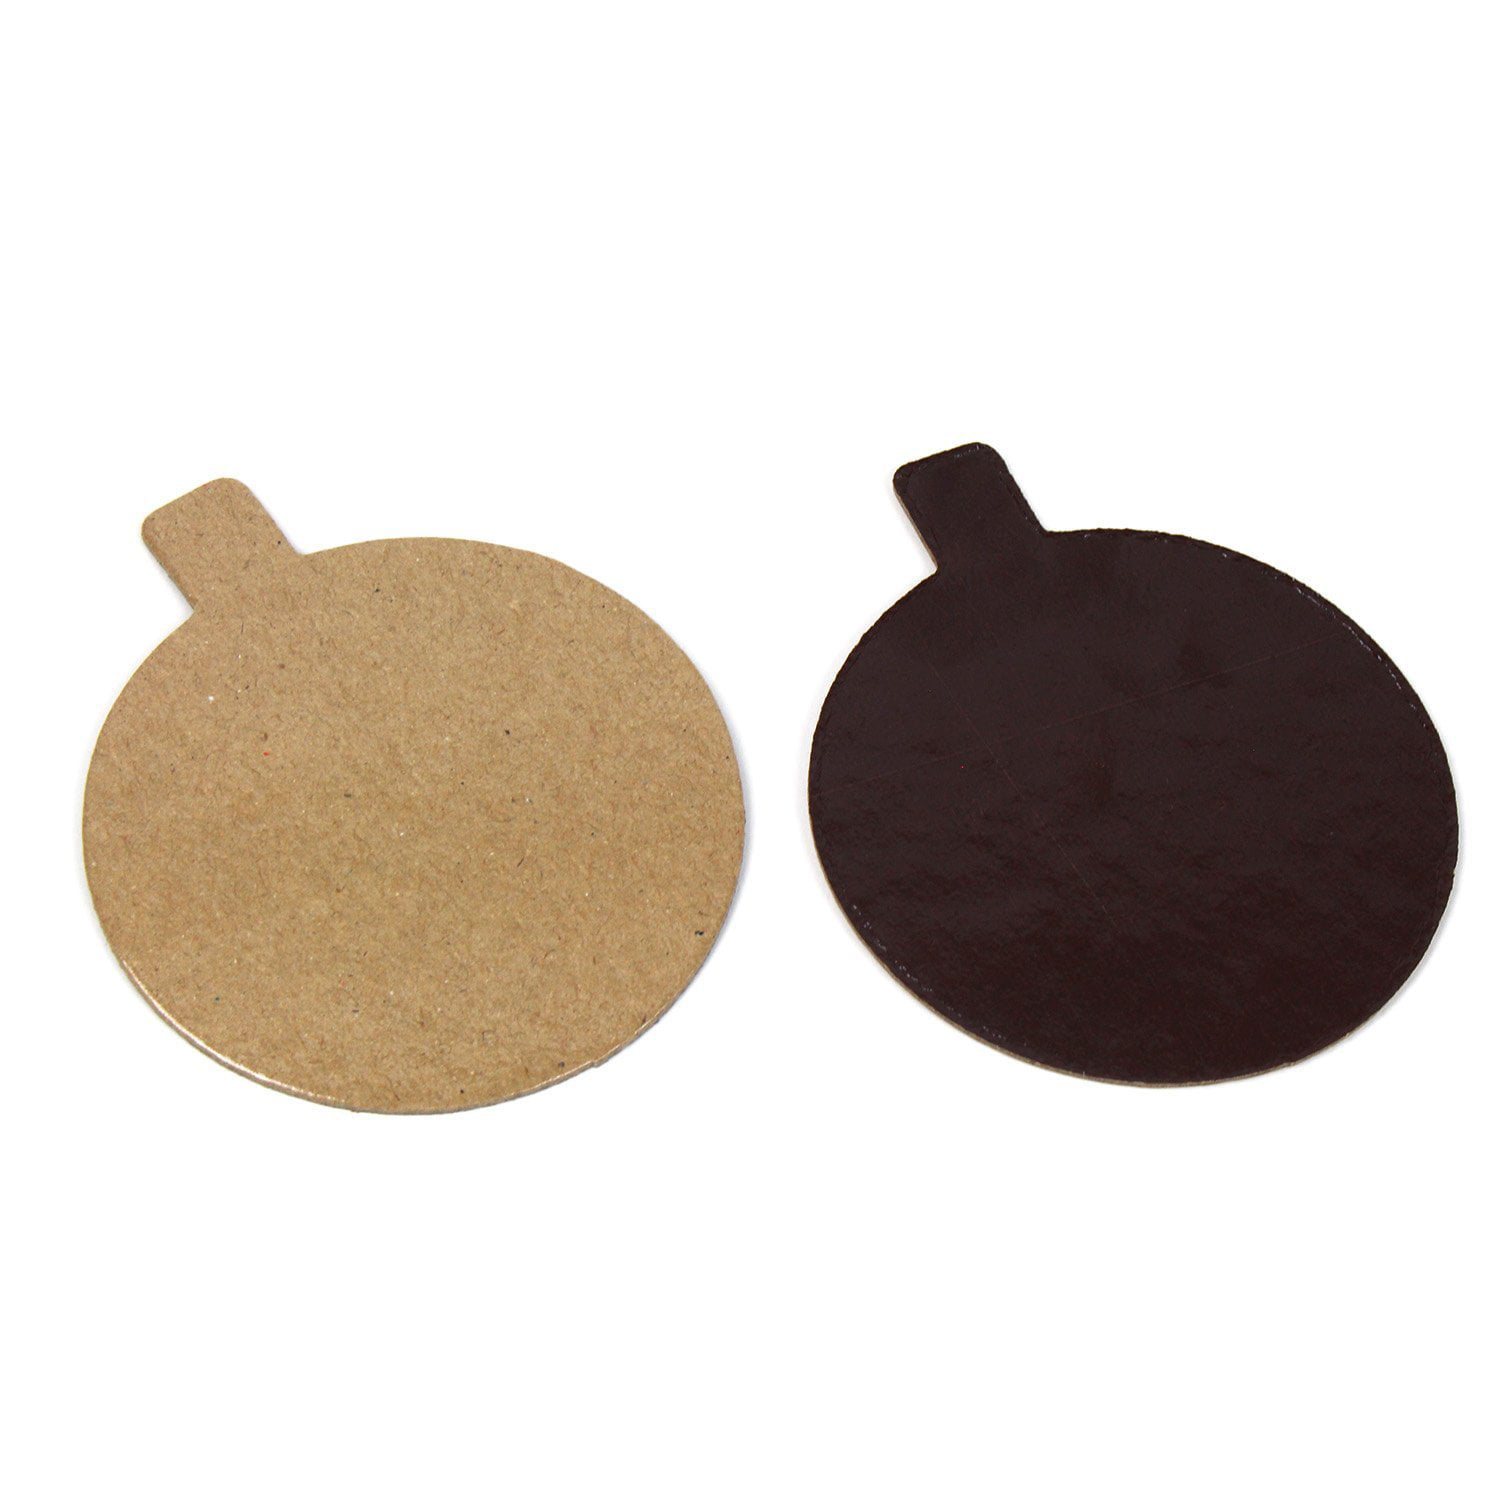 3-1//8 Inch Diameter Pack of 200 Round Pastry Board with Tab Chocolate and Praline